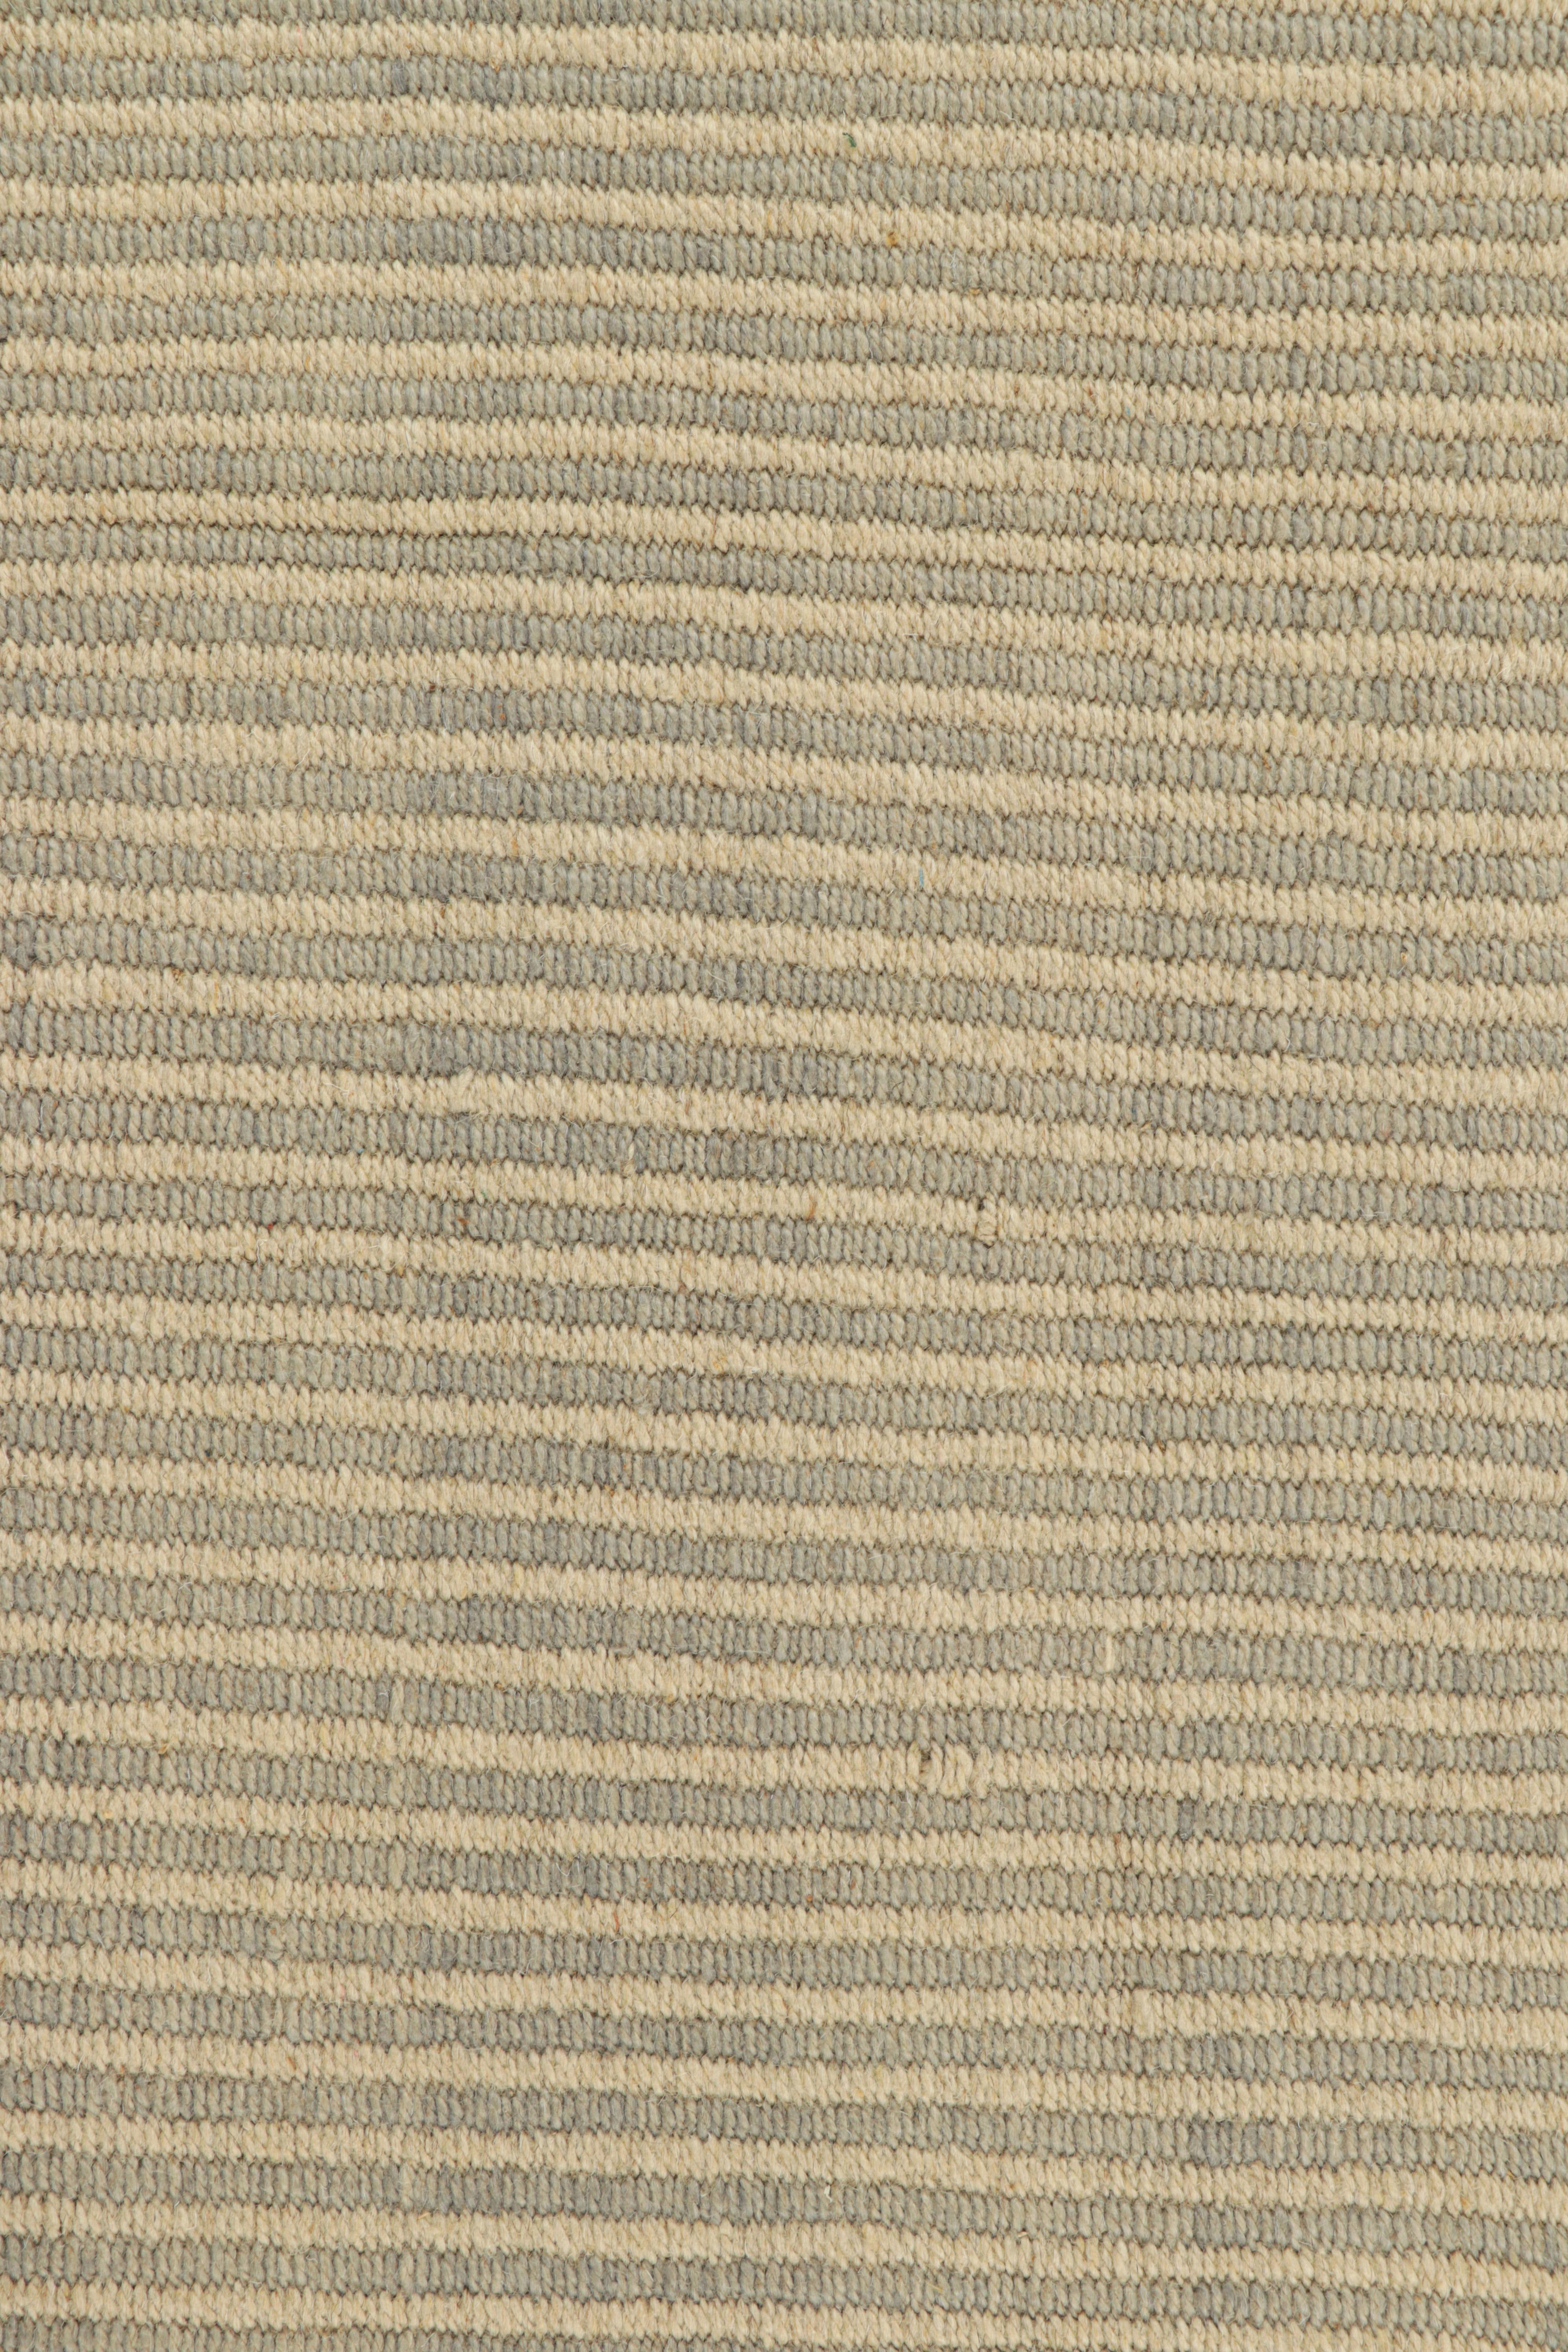 Modern Rug & Kilim’s Contemporary Kilim in Beige-Brown Textural Stripes For Sale